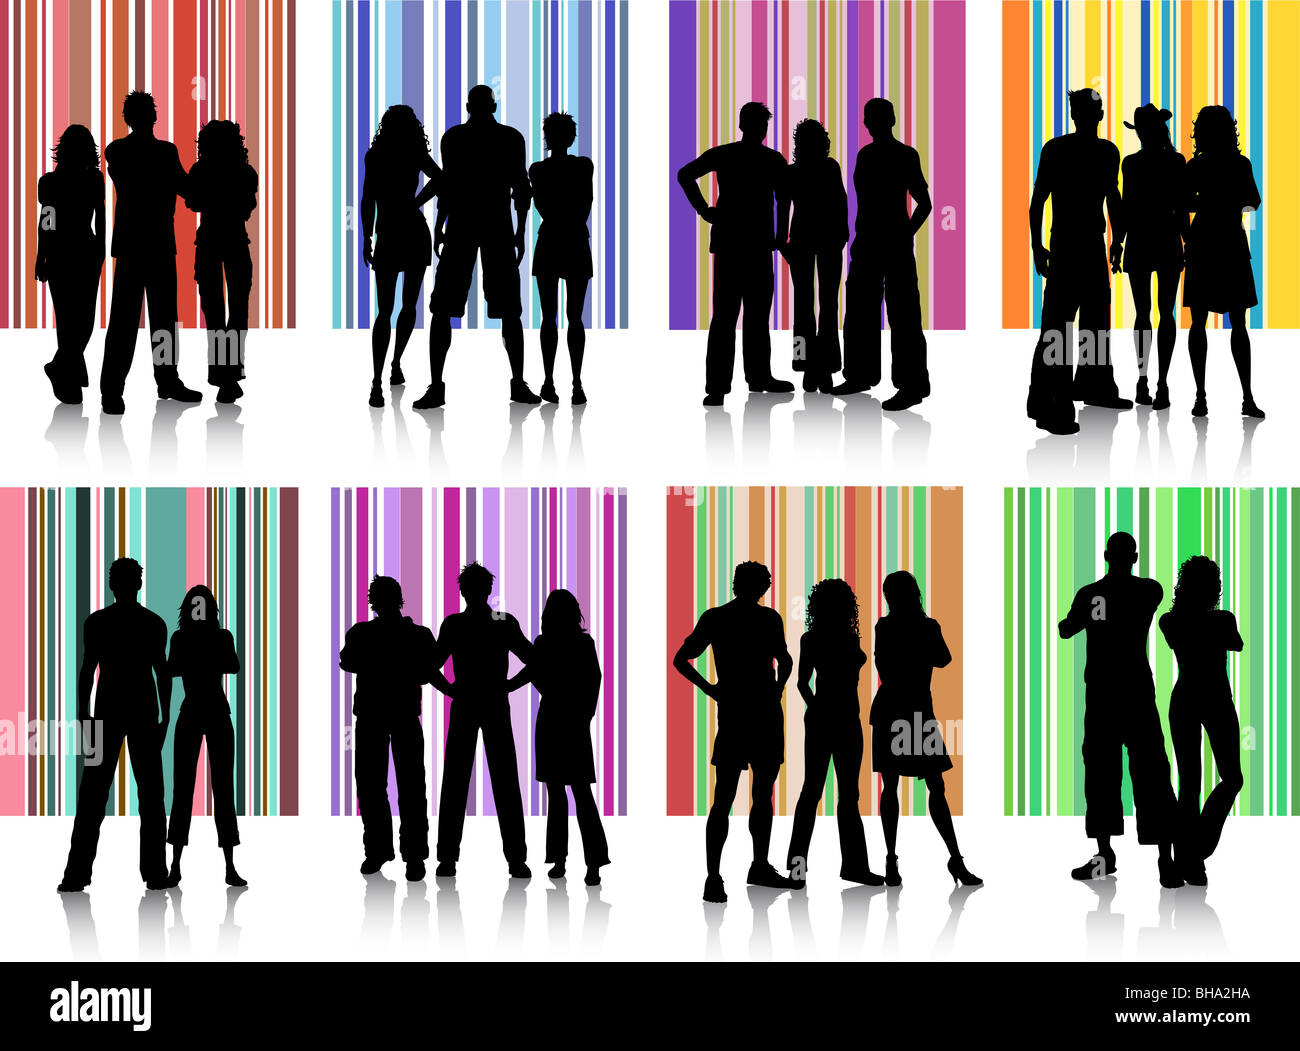 Silhouettes of various groups of people on retro backgrounds Stock Photo